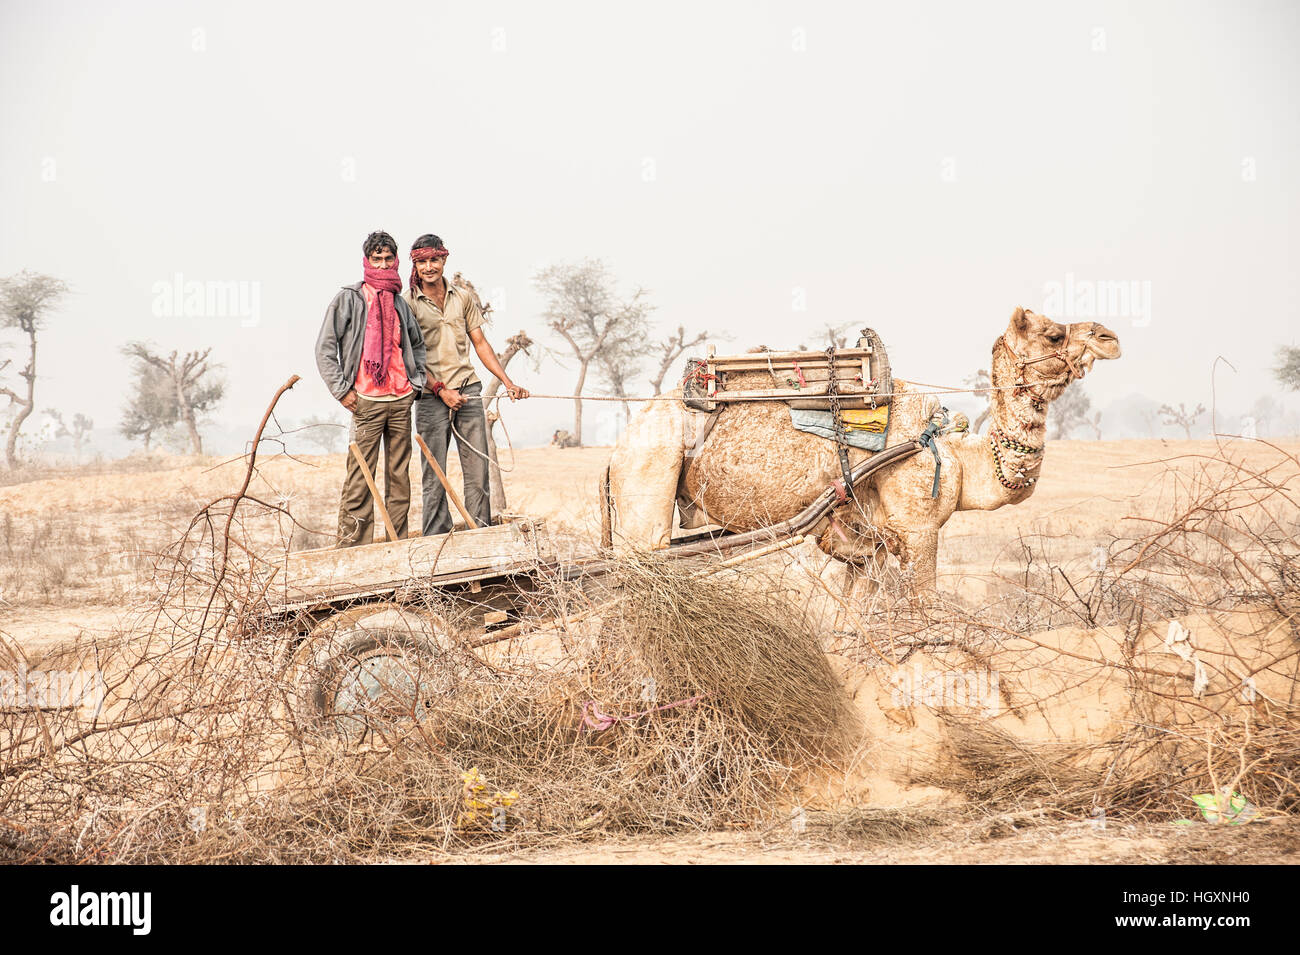 Two men standing on a cart as it is pulled by camel, Thar Desert, Rajasthan Stock Photo